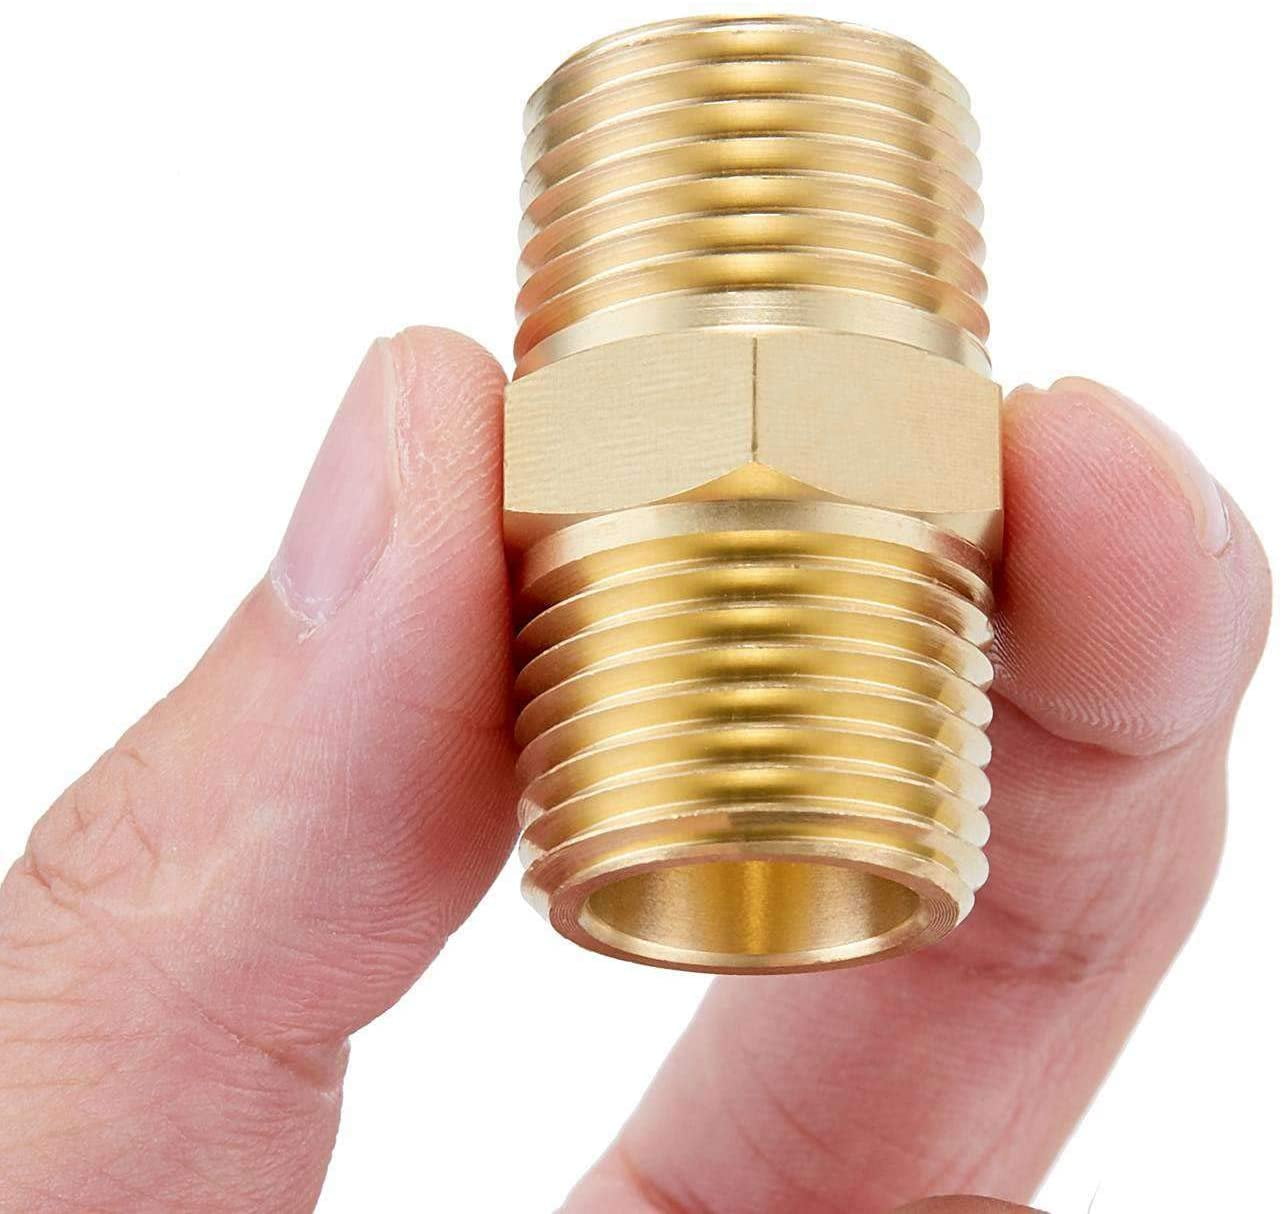 3/8" NPT x 3/8" NPT Male Hex Nipple Brass Pipe Fitting Connector Adapter 